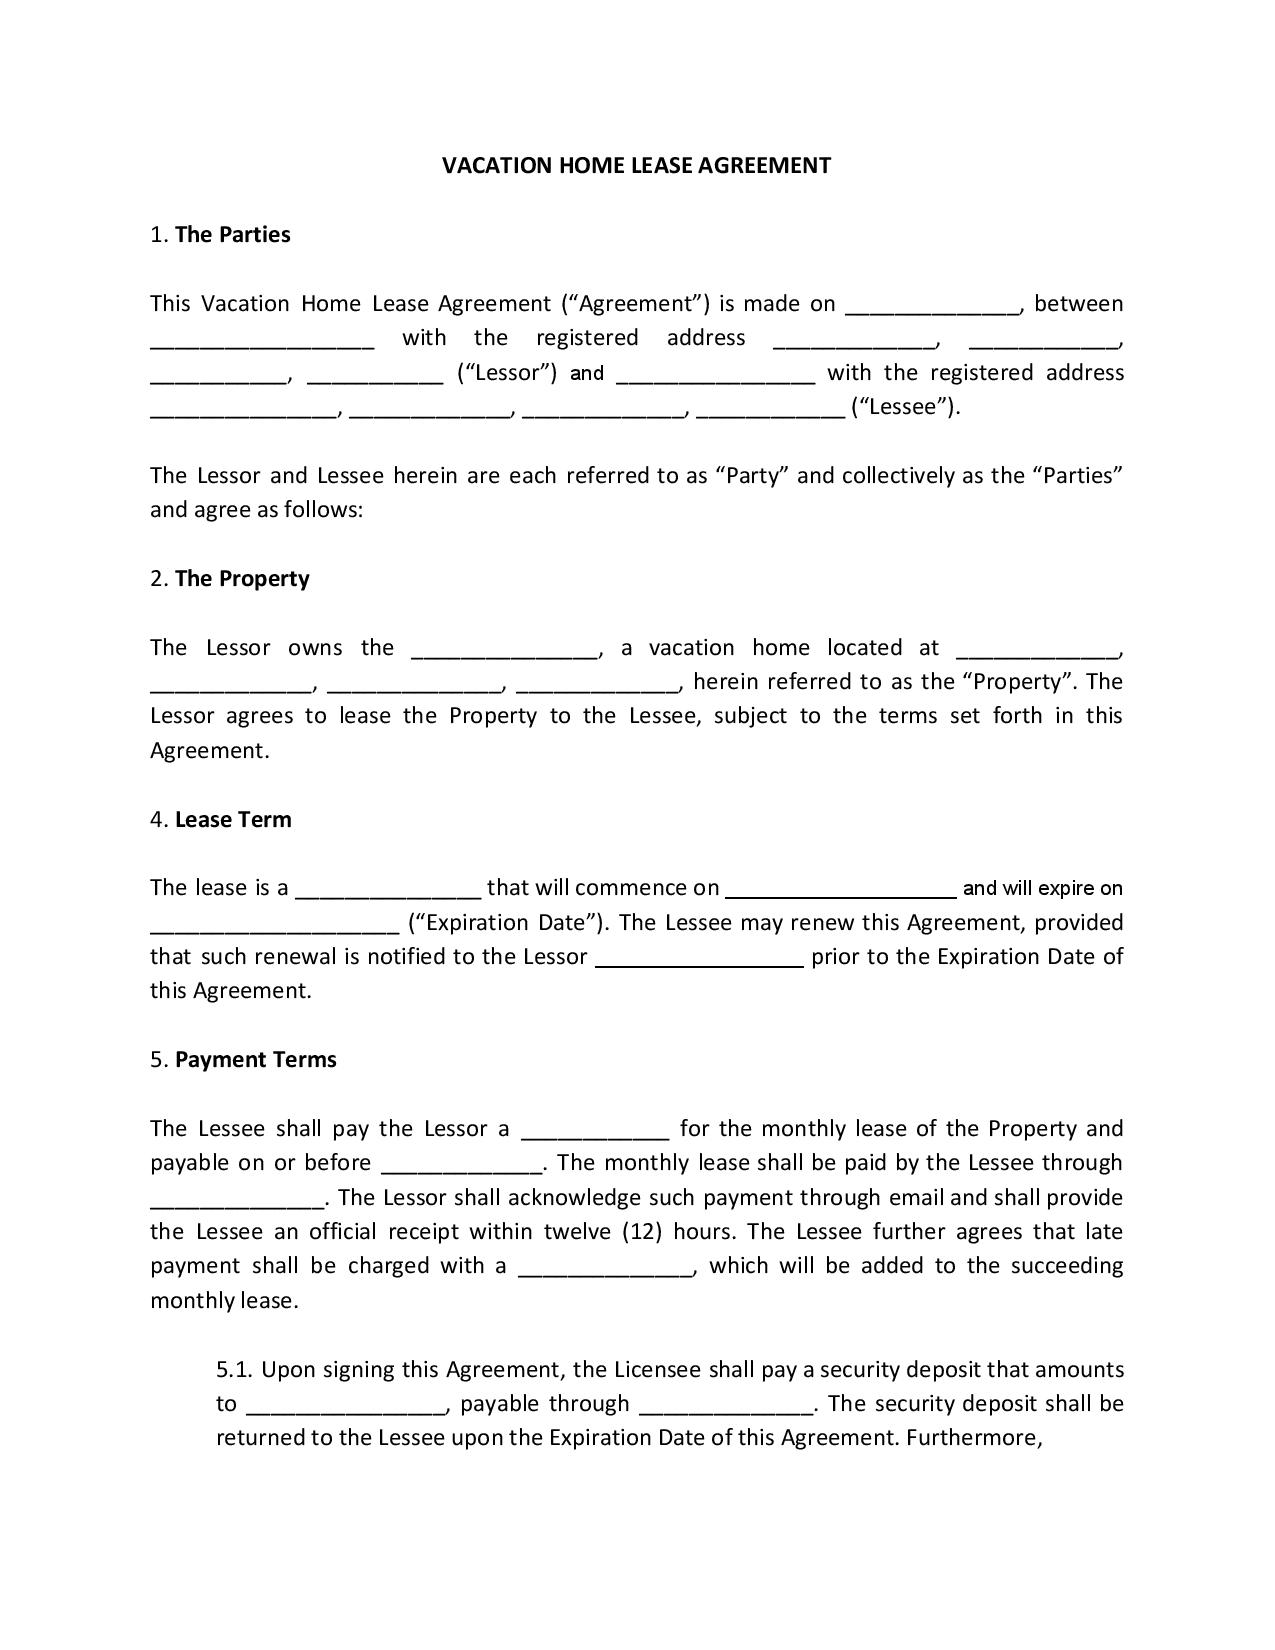 Vacation Home Lease Agreement